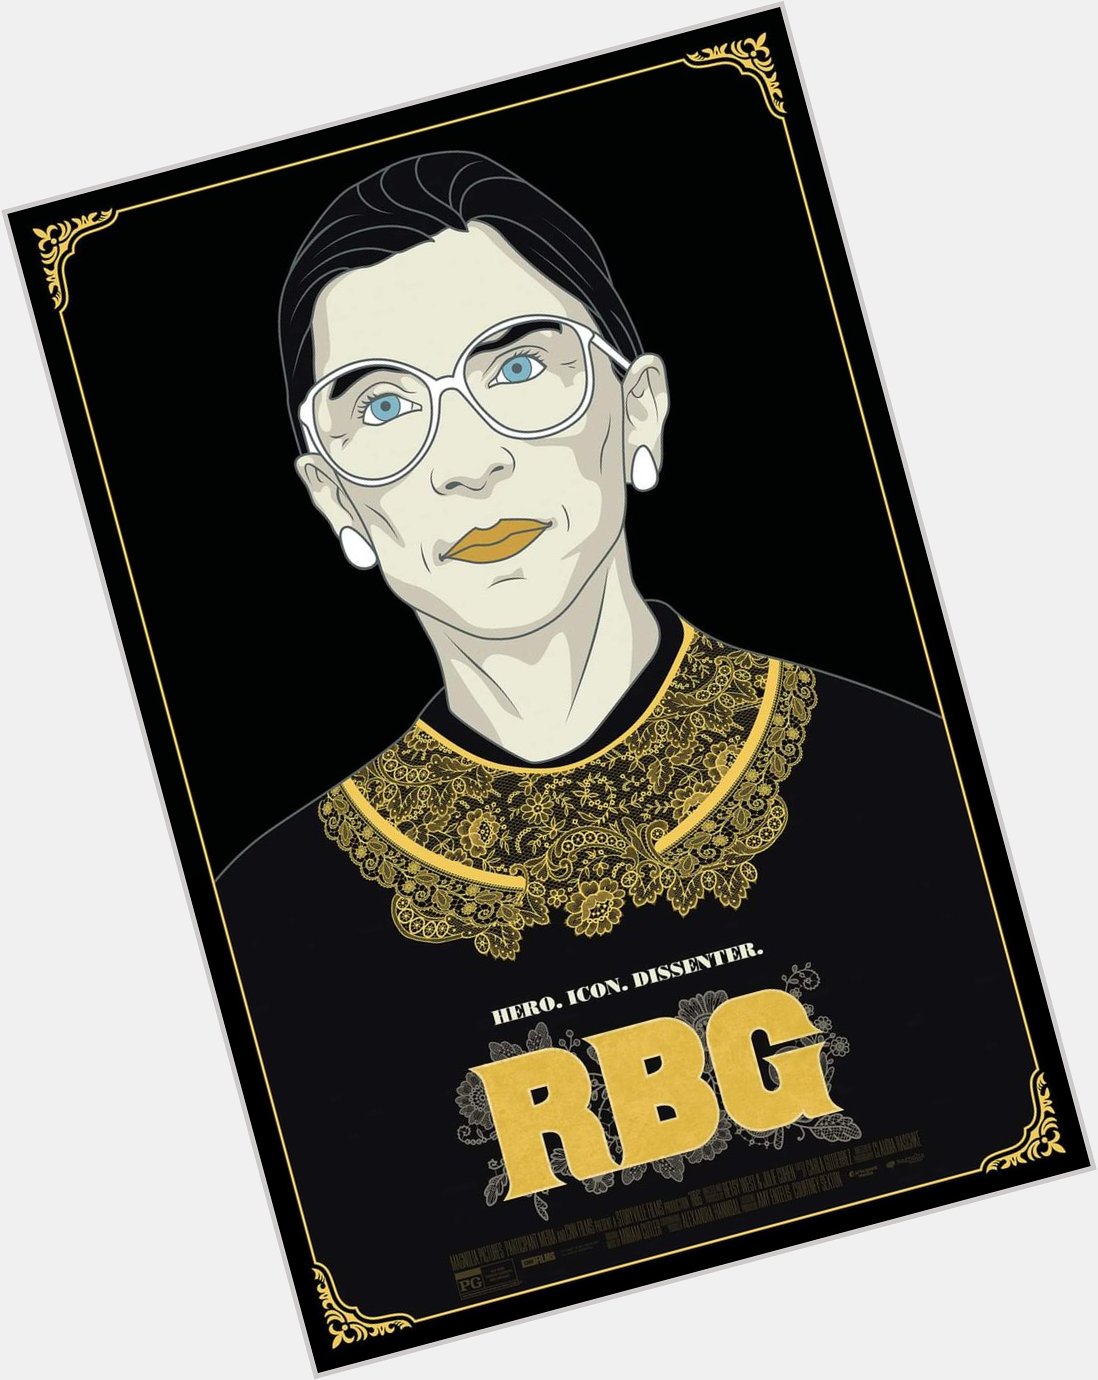 Ruth Bader Ginsburg lovingly remembered tomorrow on her March 15th Birthday! Happy Heavenly Birthday, Ruth! 